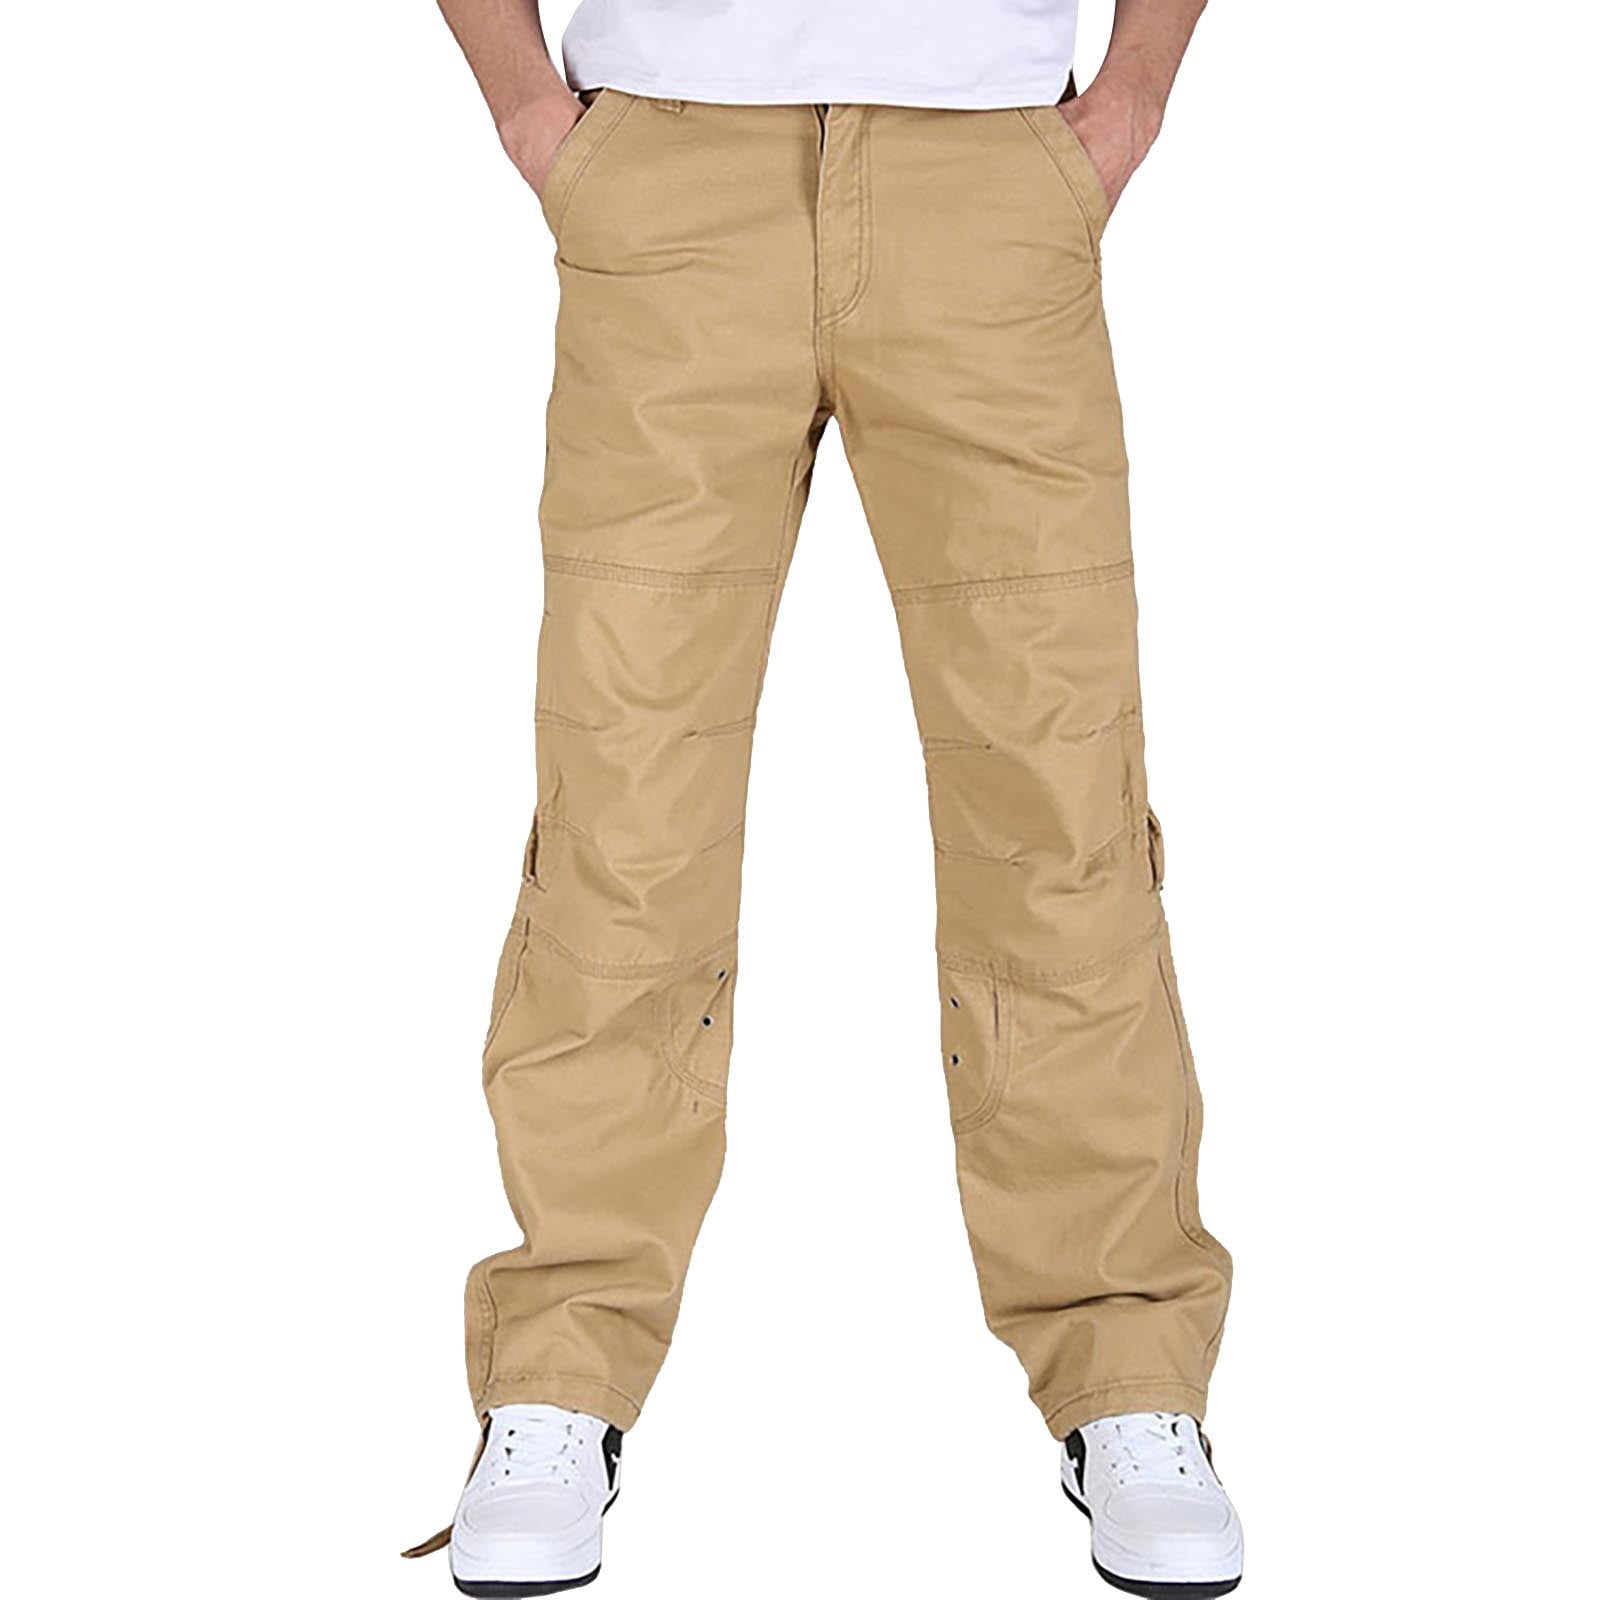 PMUYBHF Cargo Work Pants for Men 40X34 Loose Fitting Overalls with ...